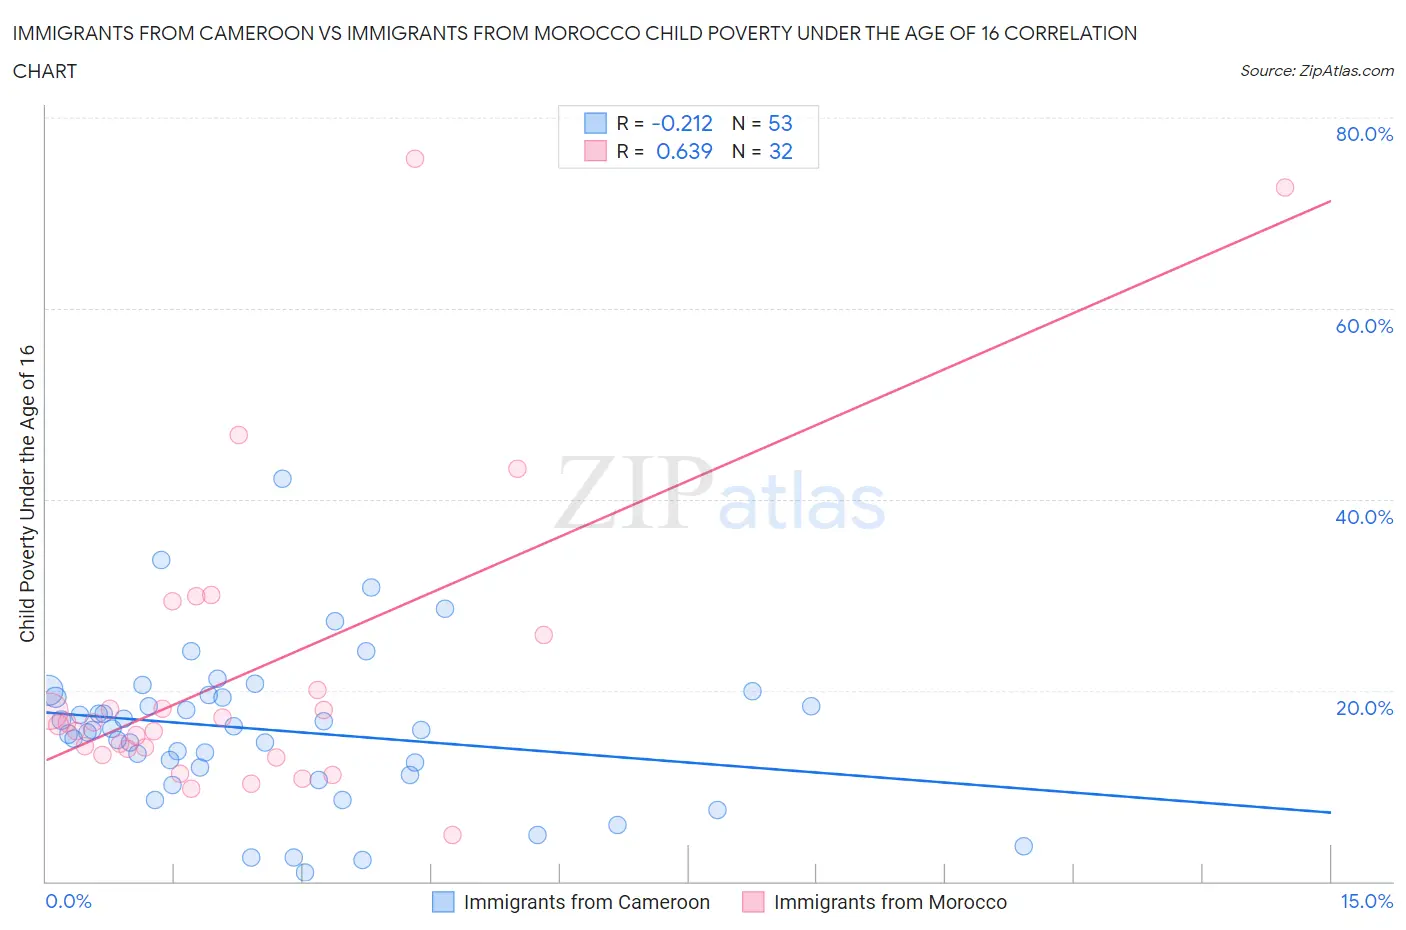 Immigrants from Cameroon vs Immigrants from Morocco Child Poverty Under the Age of 16